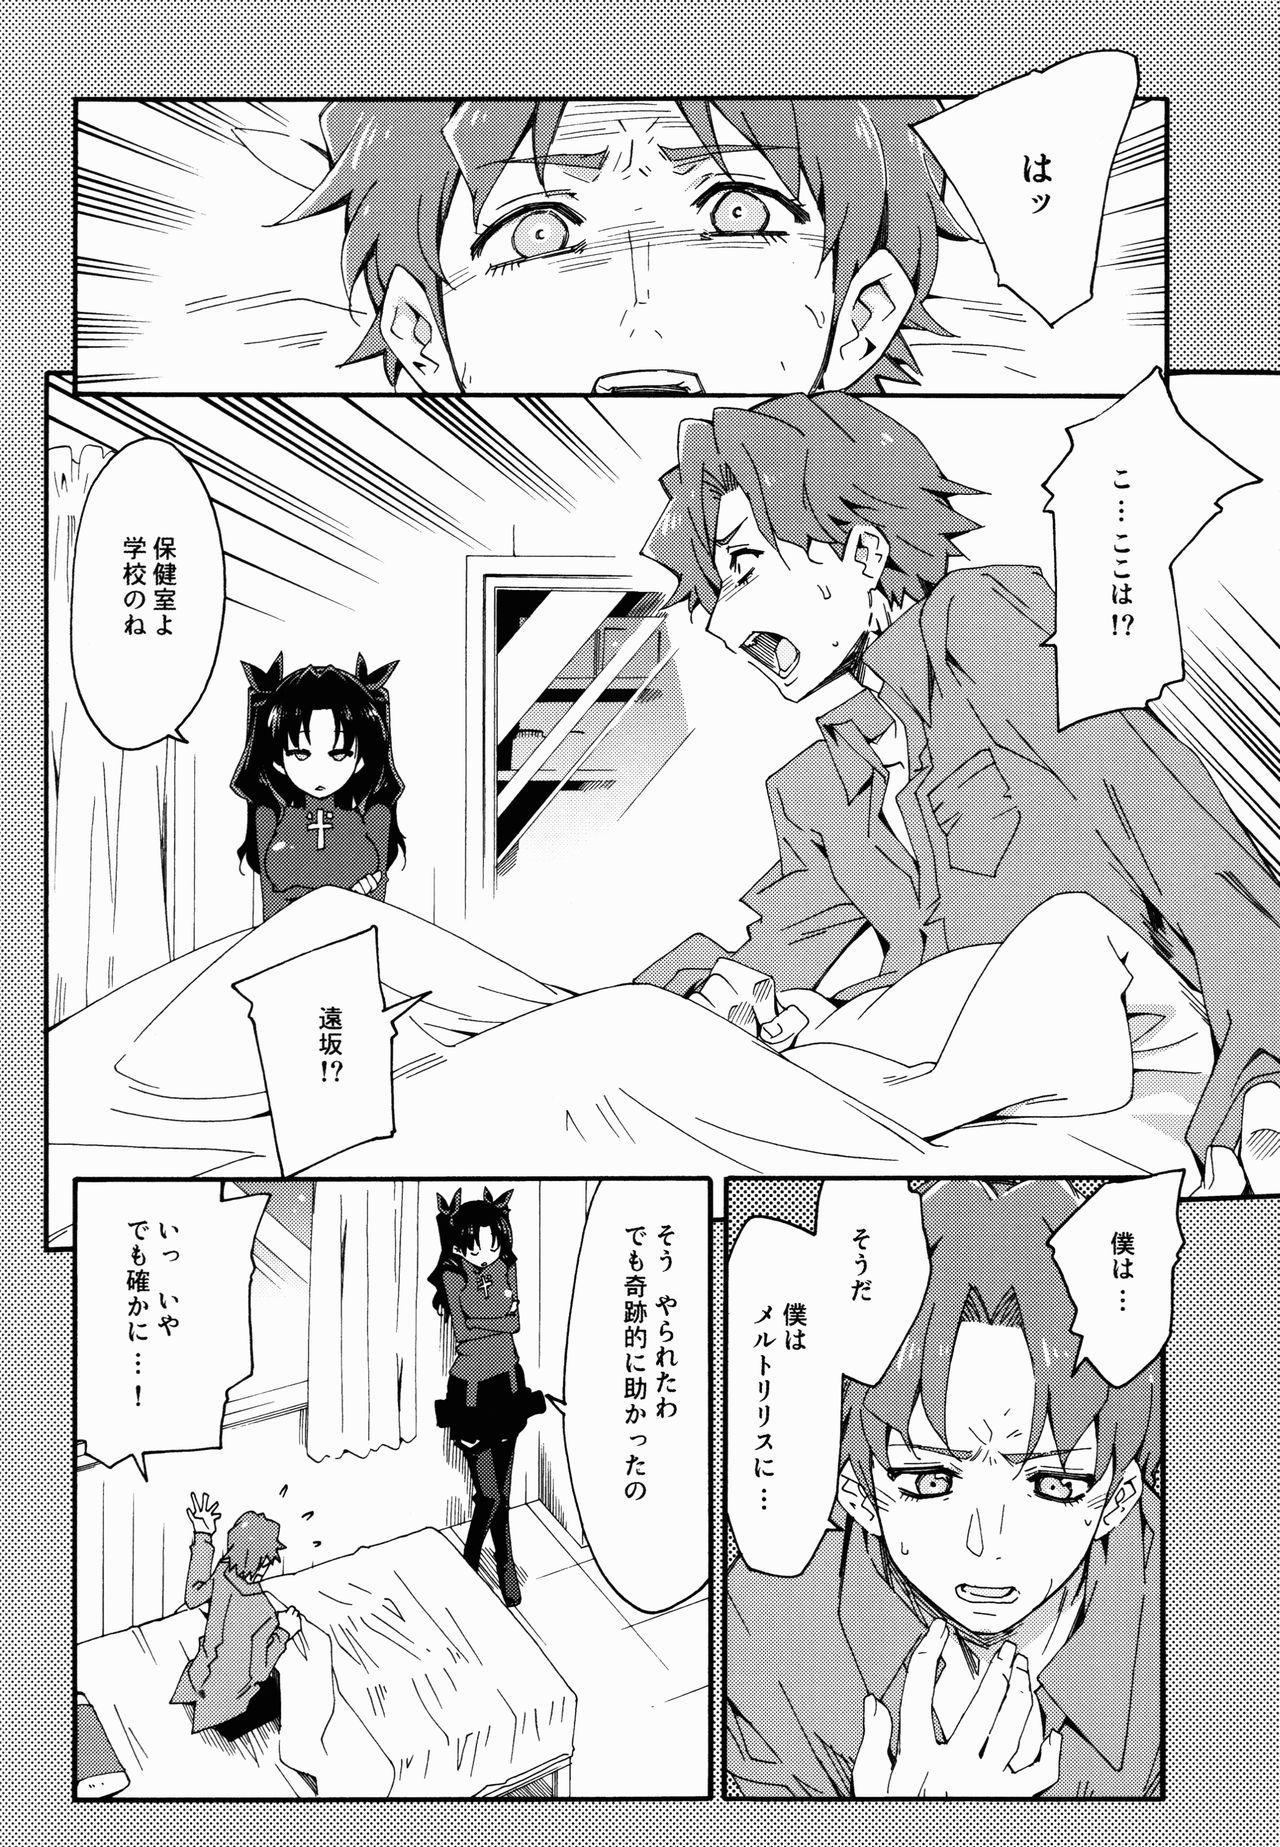 Penetration Melty/kiss - Fate extra Virtual - Page 6